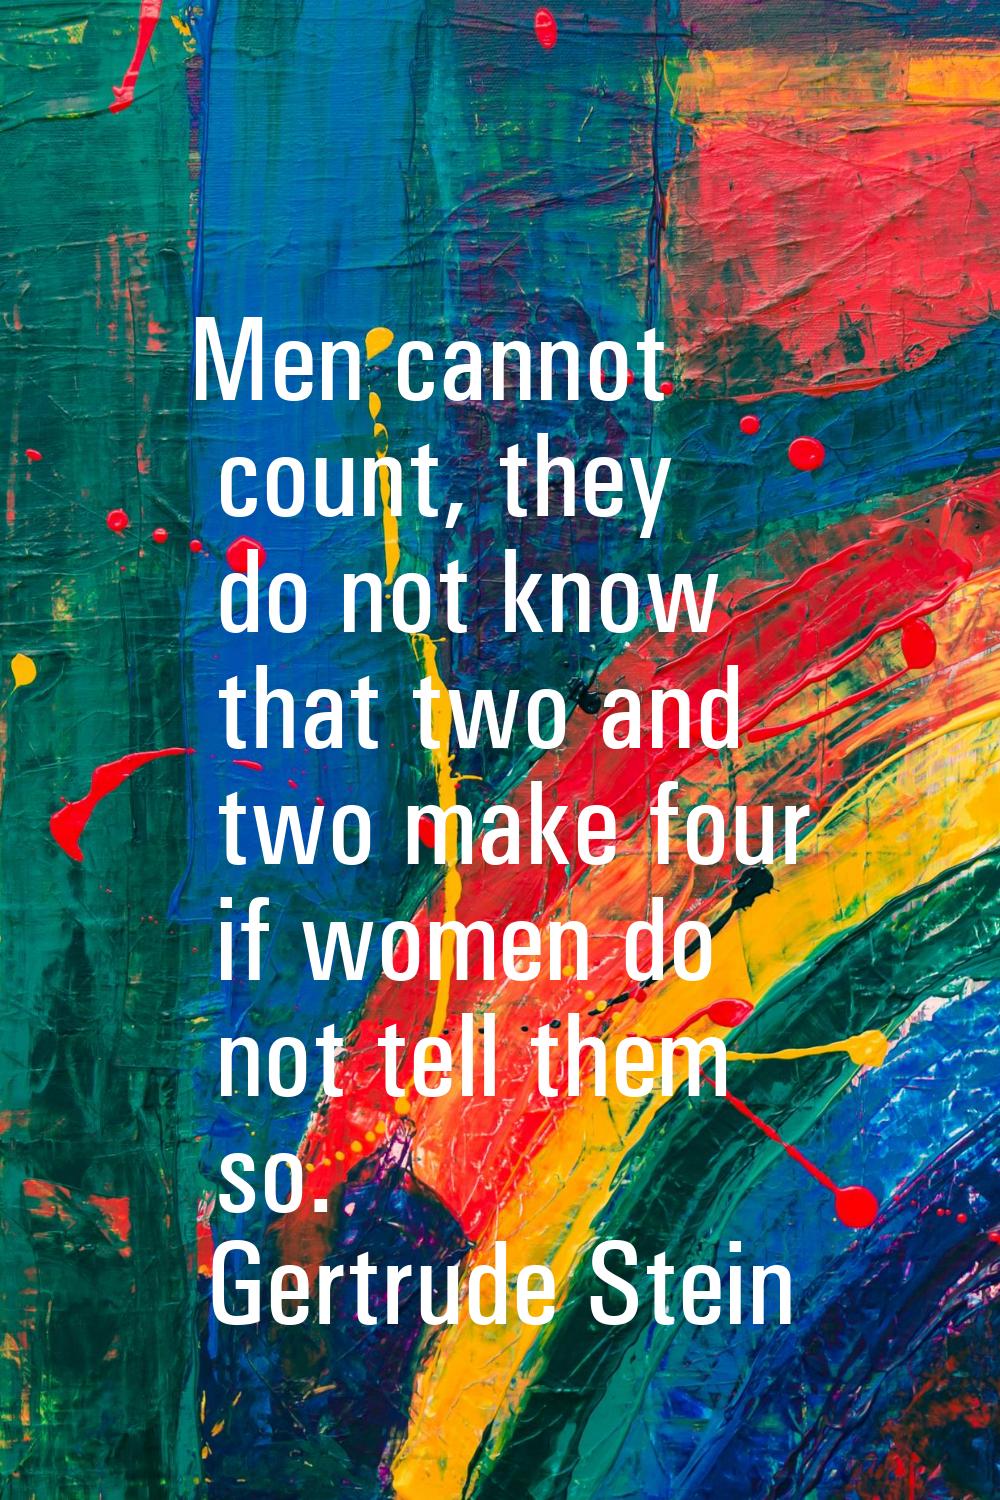 Men cannot count, they do not know that two and two make four if women do not tell them so.